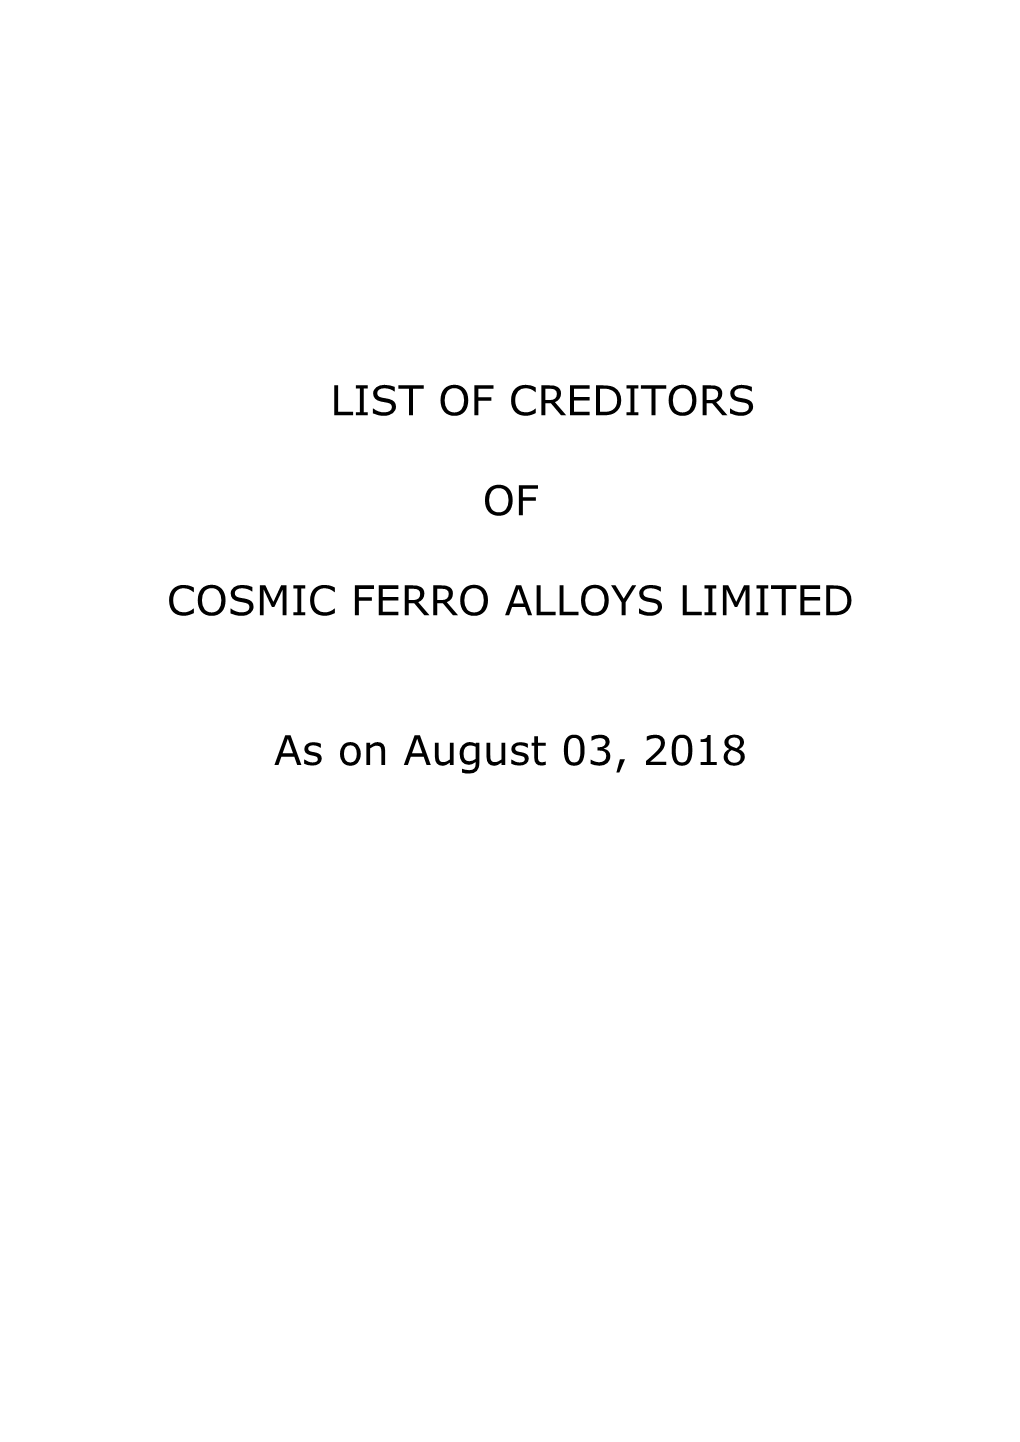 LIST of CREDITORS of COSMIC FERRO ALLOYS LIMITED As On